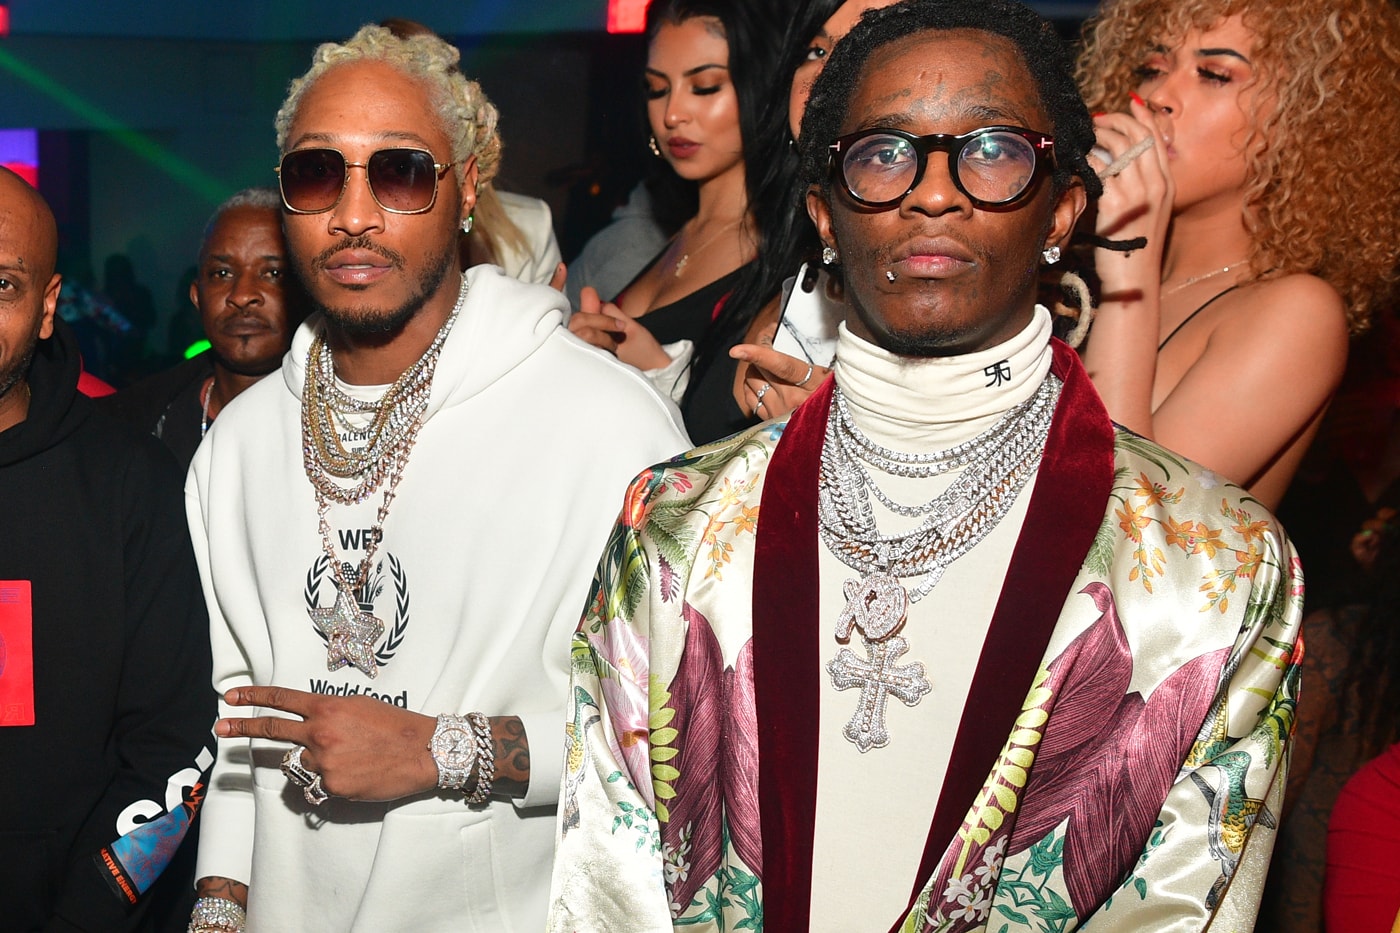 Looks Like Future & Young Thug Swapped Words